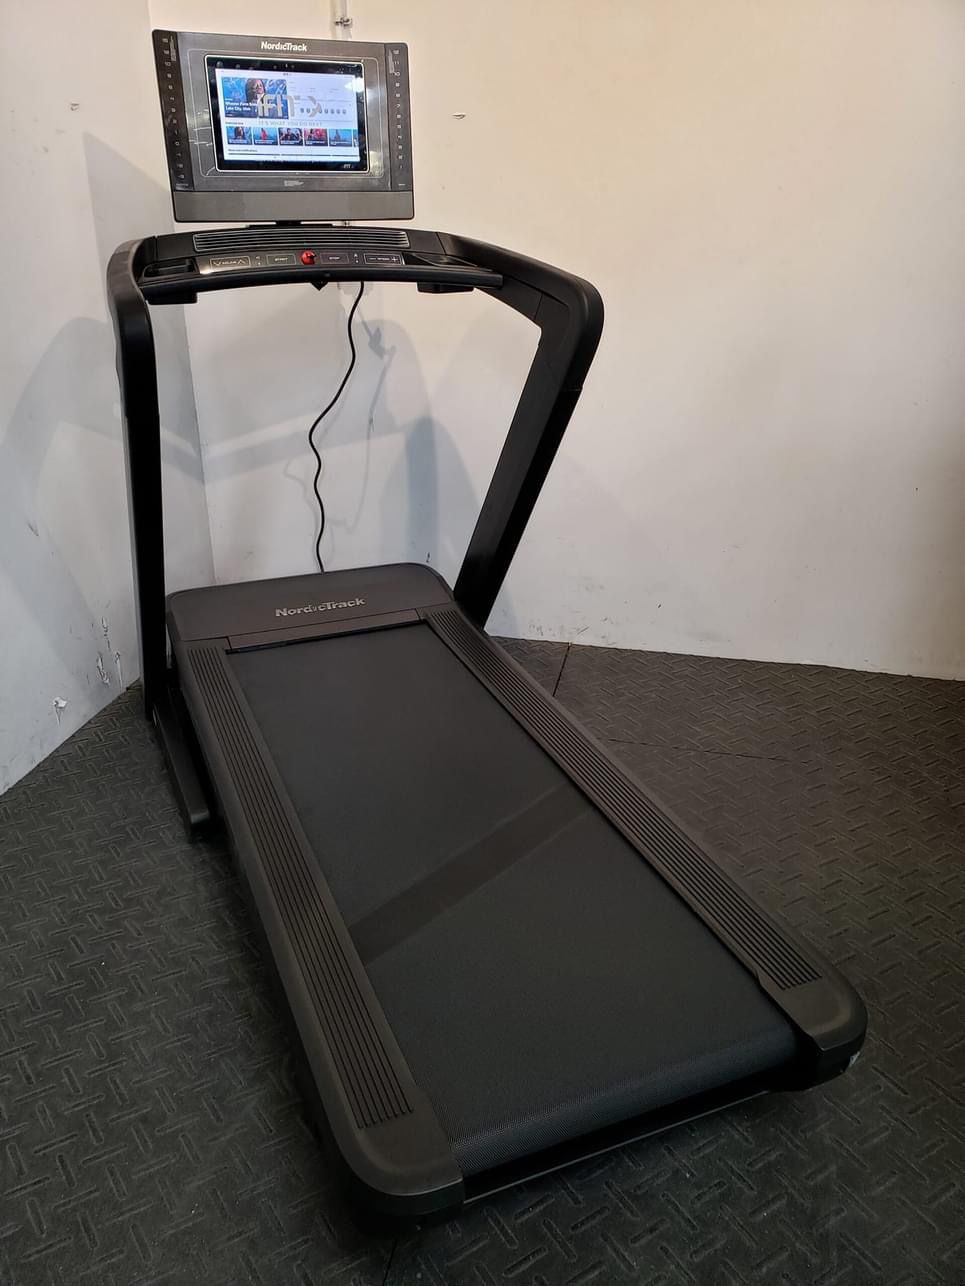 Nordictrack Commercial Treadmill - Brand New